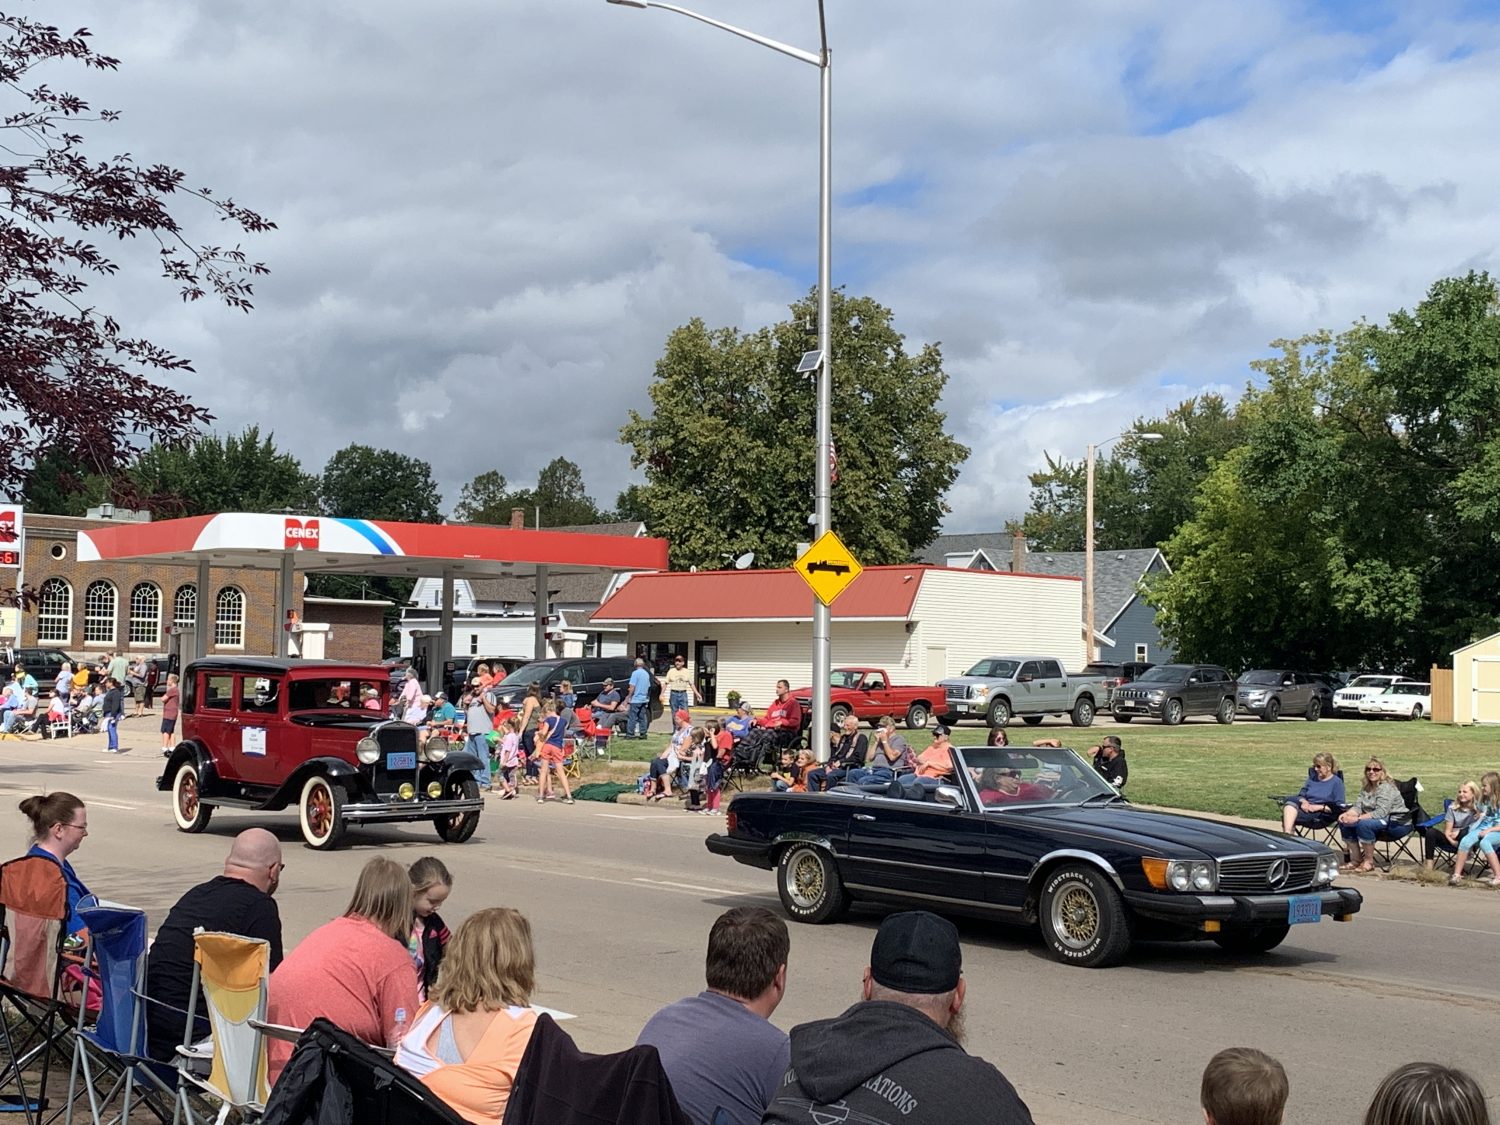 2020 Merrill Labor Day Parade and festivities canceled